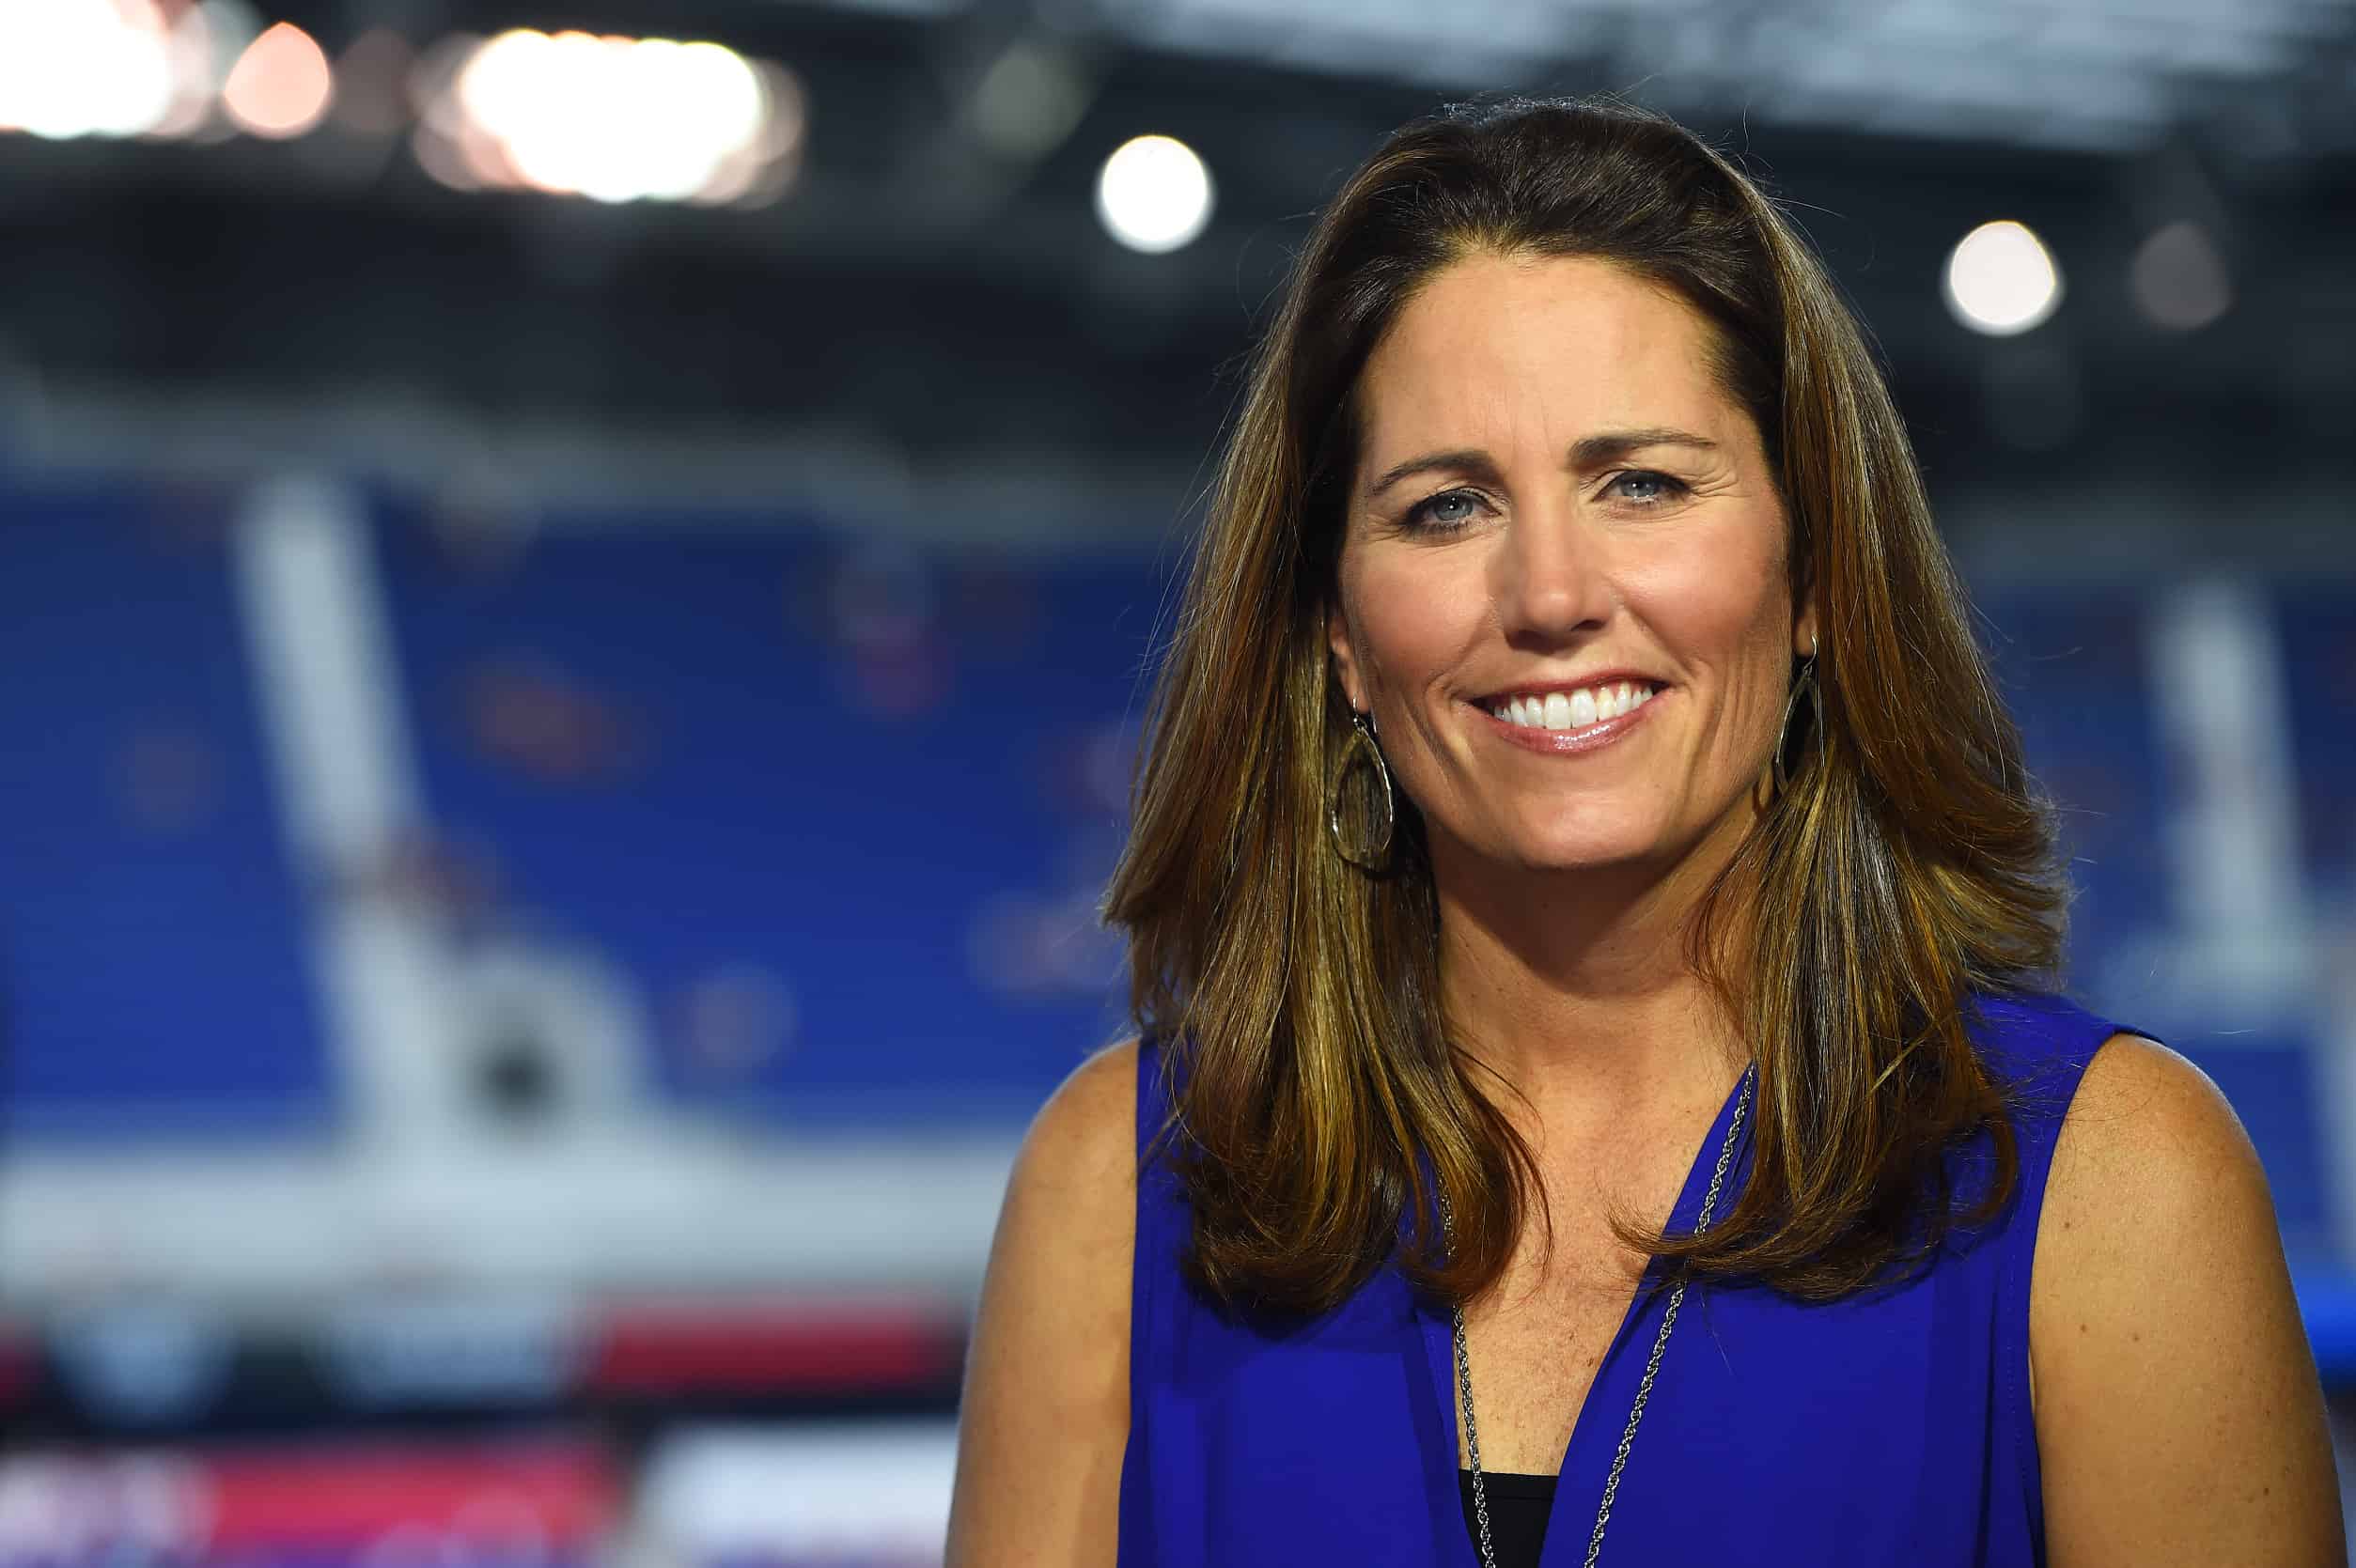 Julie Foudy during the United States Women's National Soccer Team/South Korea Women's National Football Team international friendly match. (Photo by Joe Faraoni / ESPN Images)